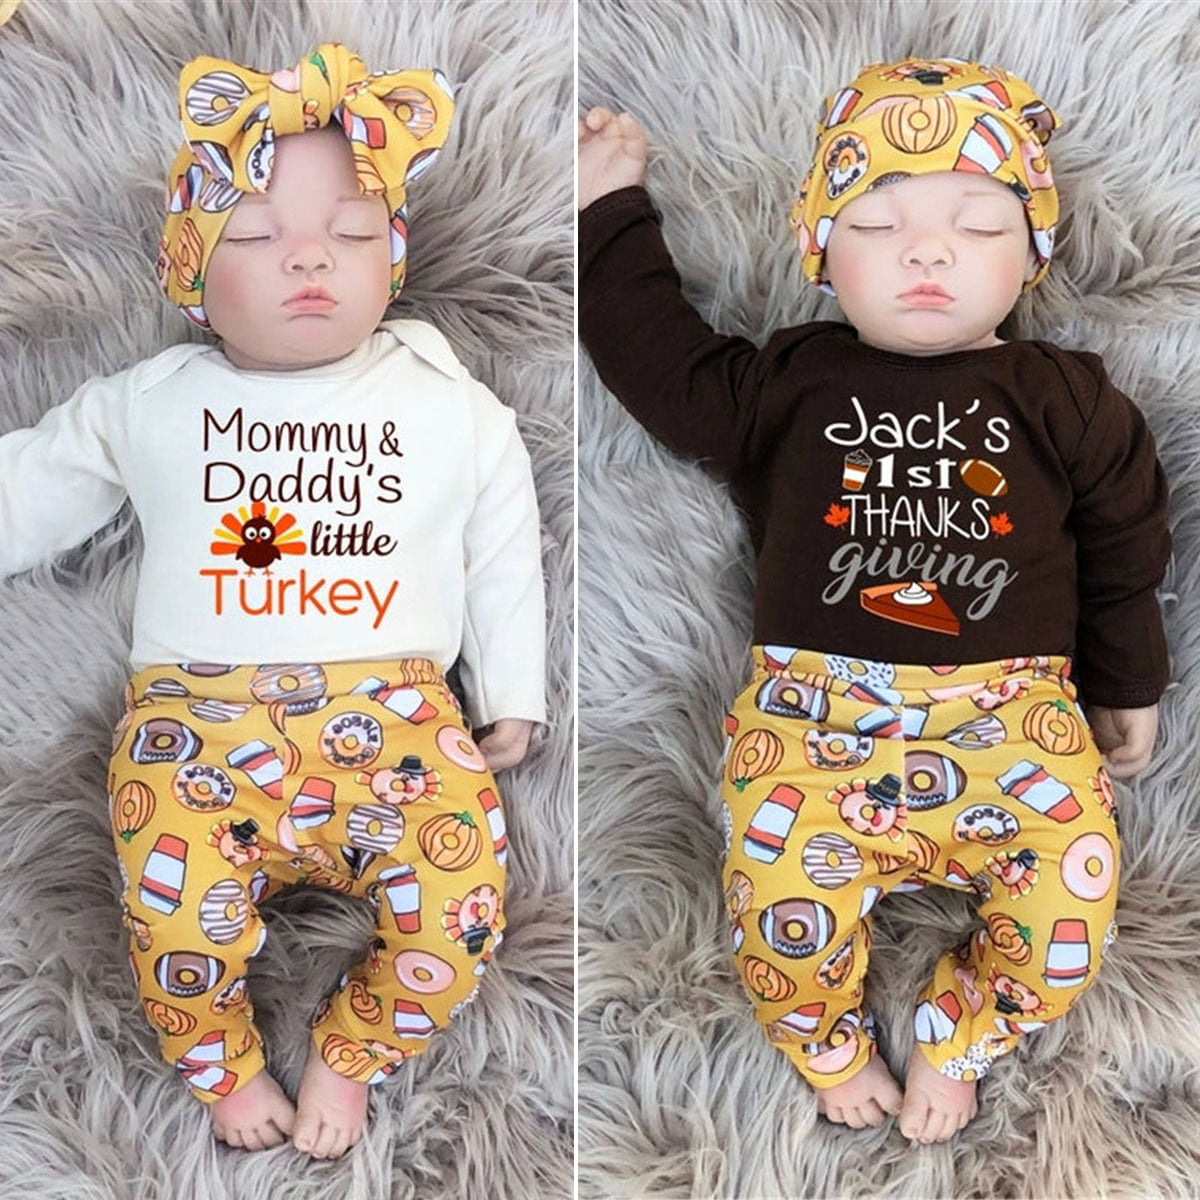 Newborn Baby Girls Boys Outfits Set My 1st Thanksgiving Clothes Infant Long Sleeve Bodysuit Tops Floral Pants+Headband 